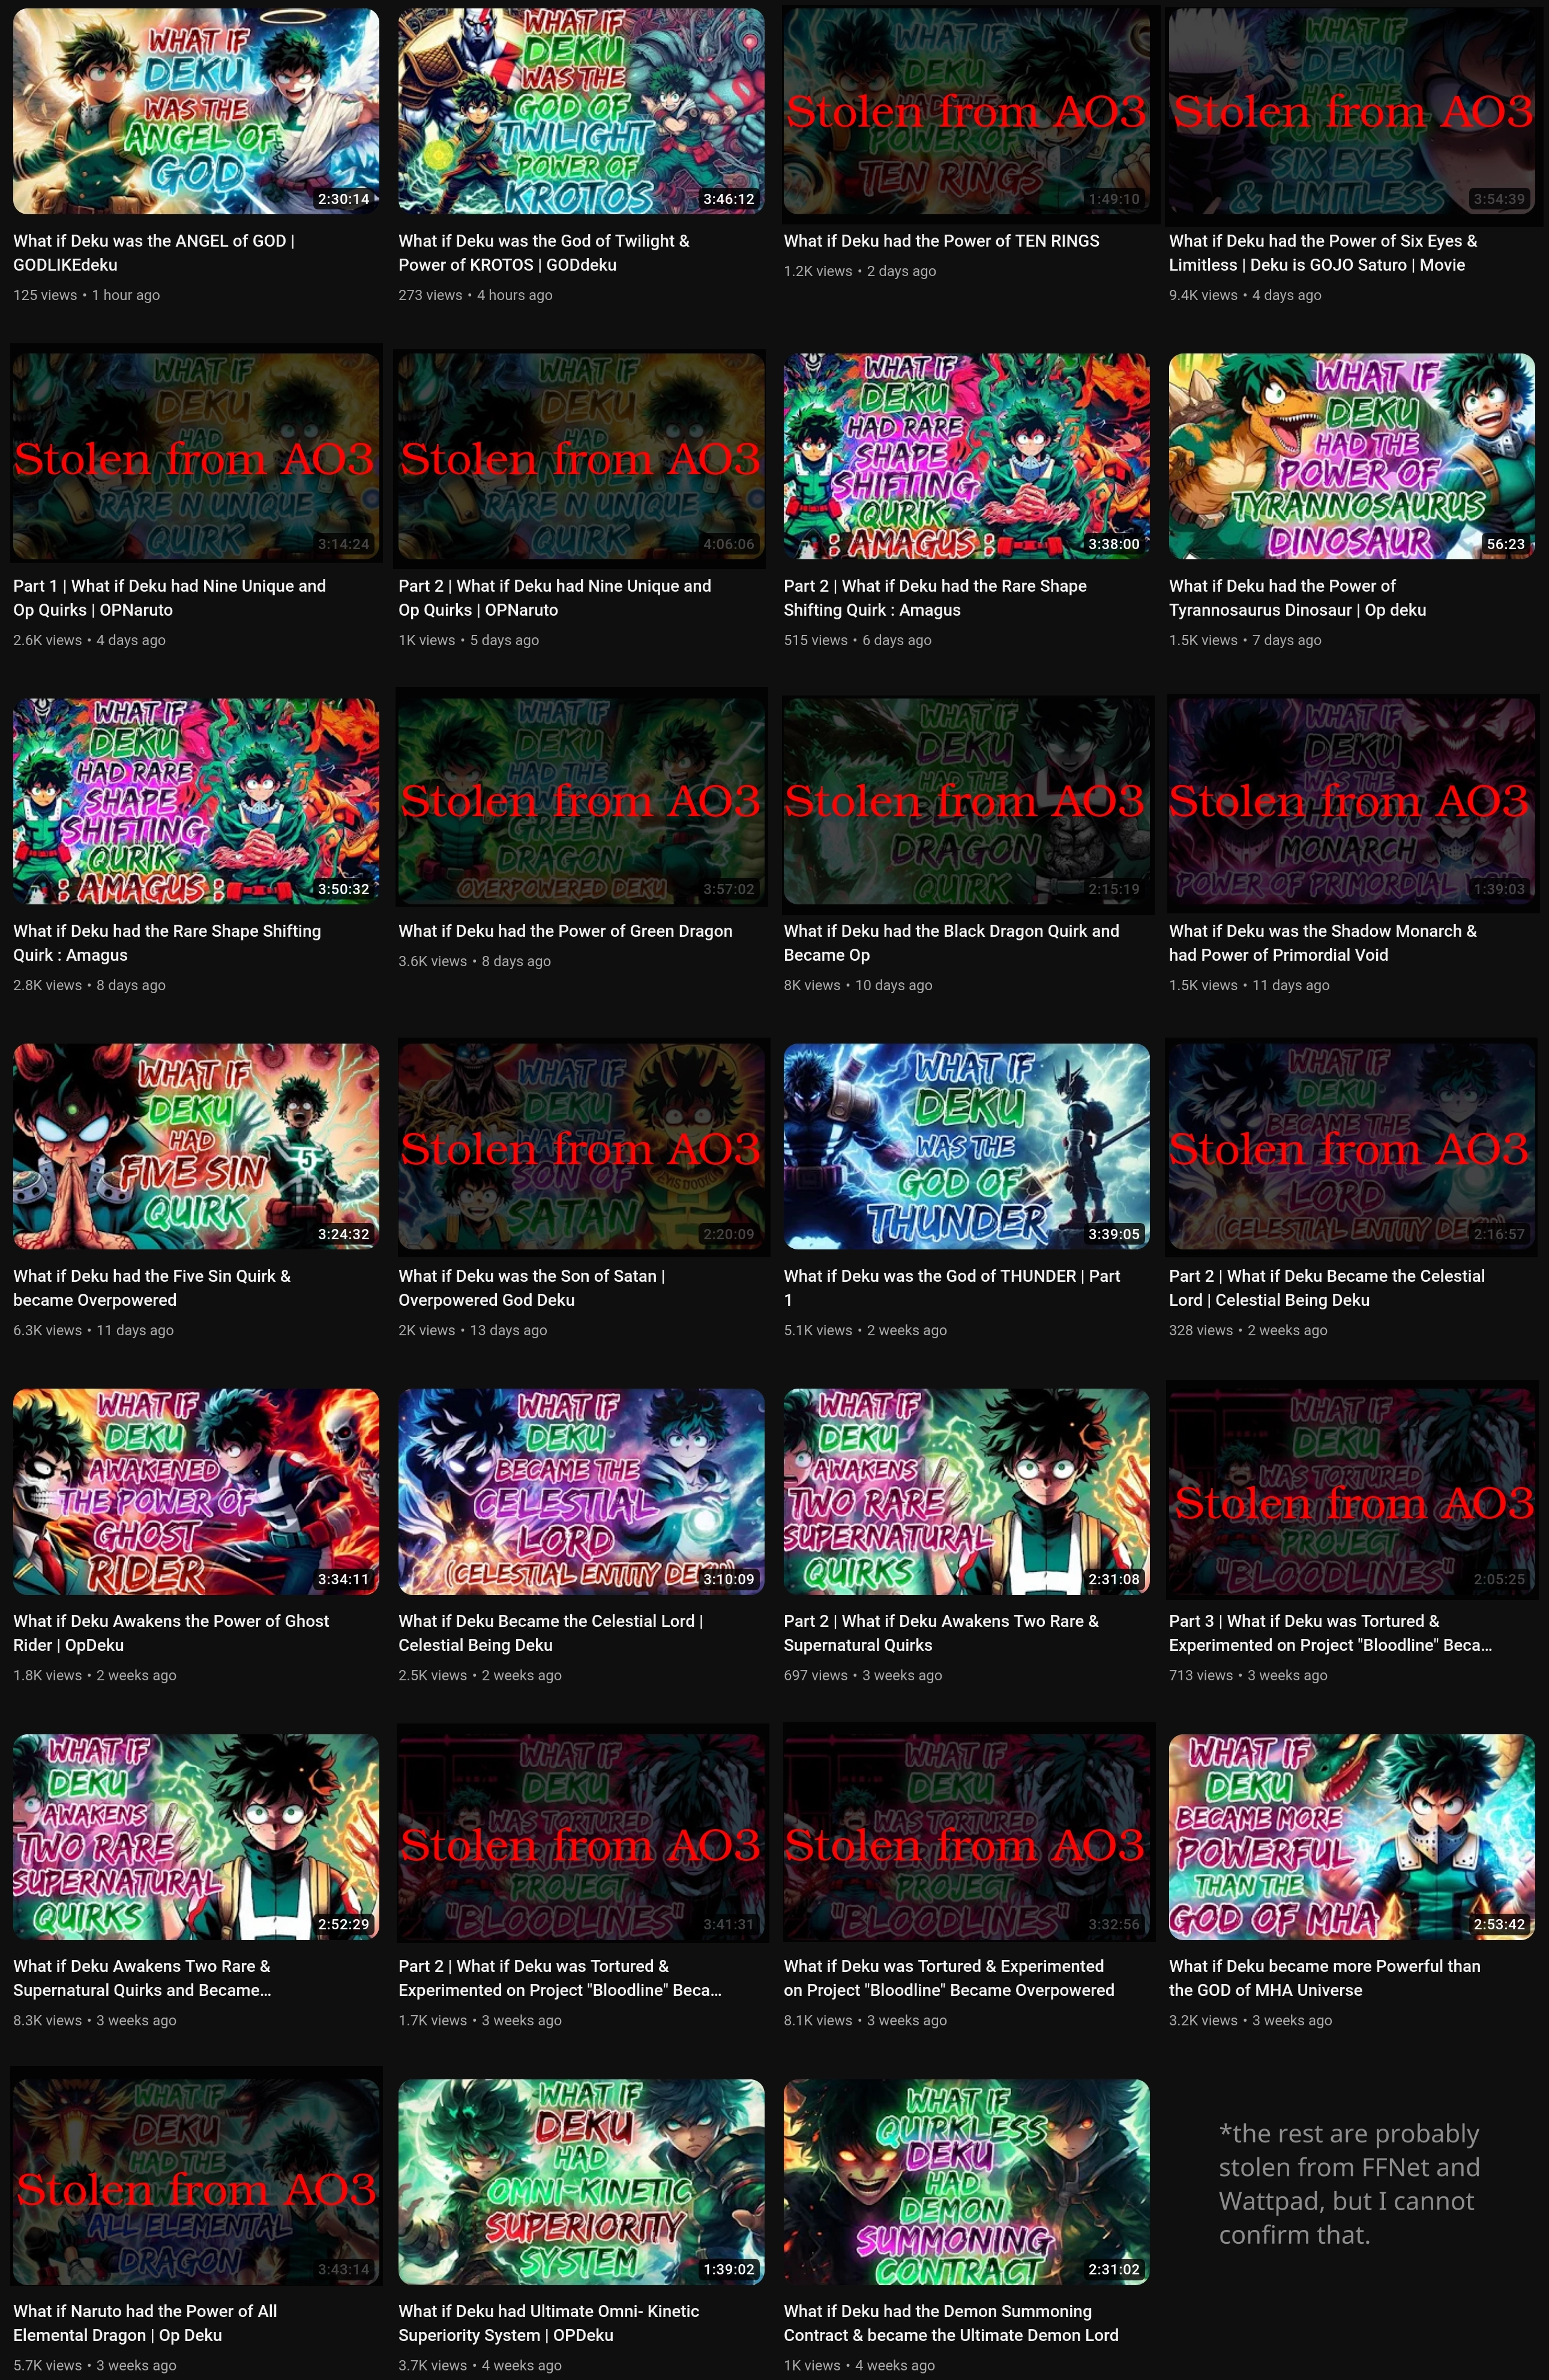 Screenshot of YouTube Channel Infinite Paradox Fanfic, one of the content farms, with 27 videos, 14 of which are stolen from AO3